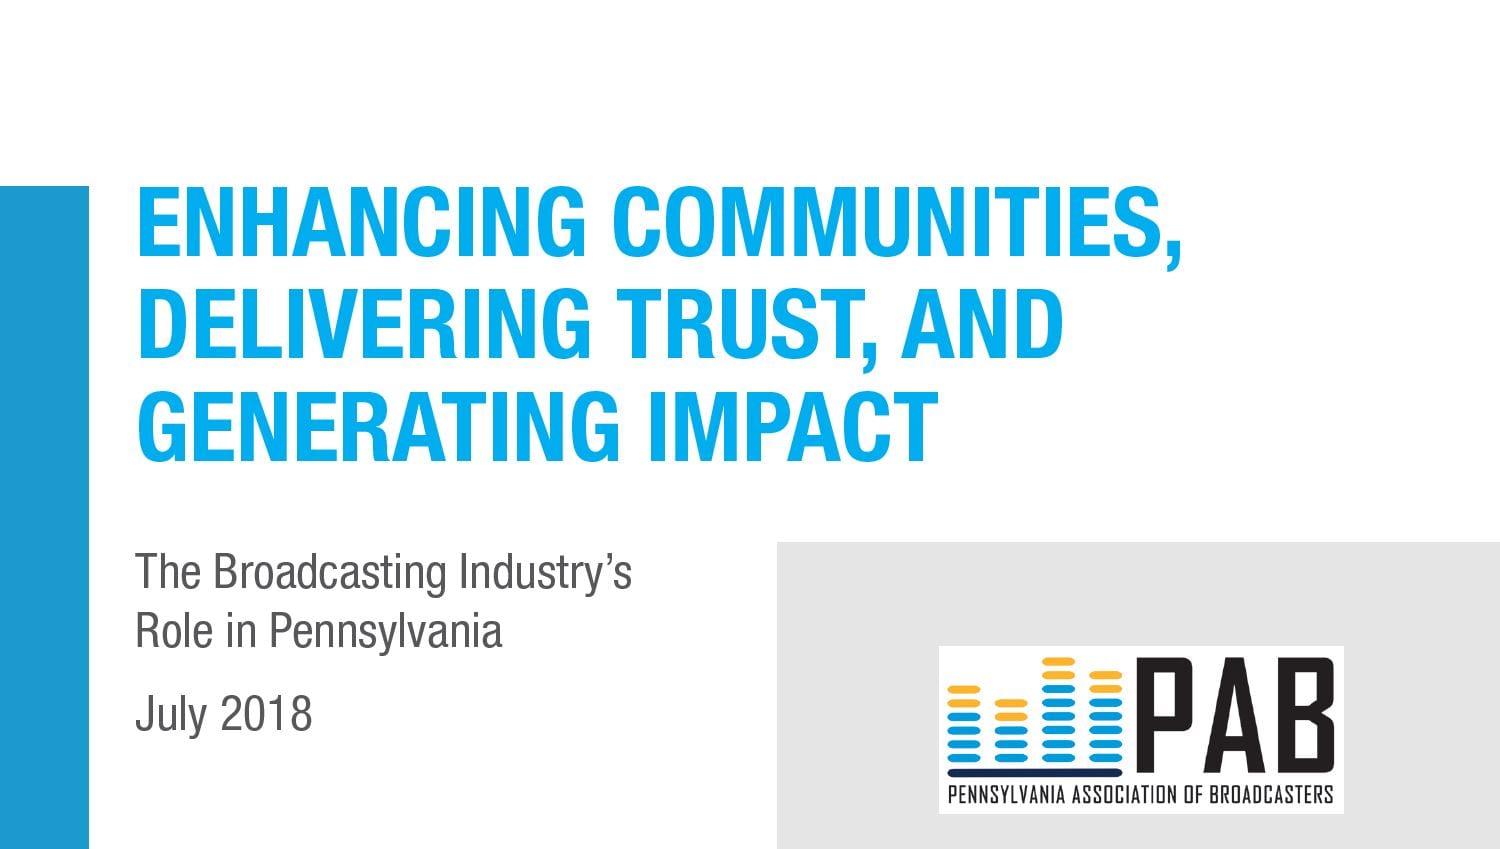 The Broadcasting Industry’s Role in Pennsylvania